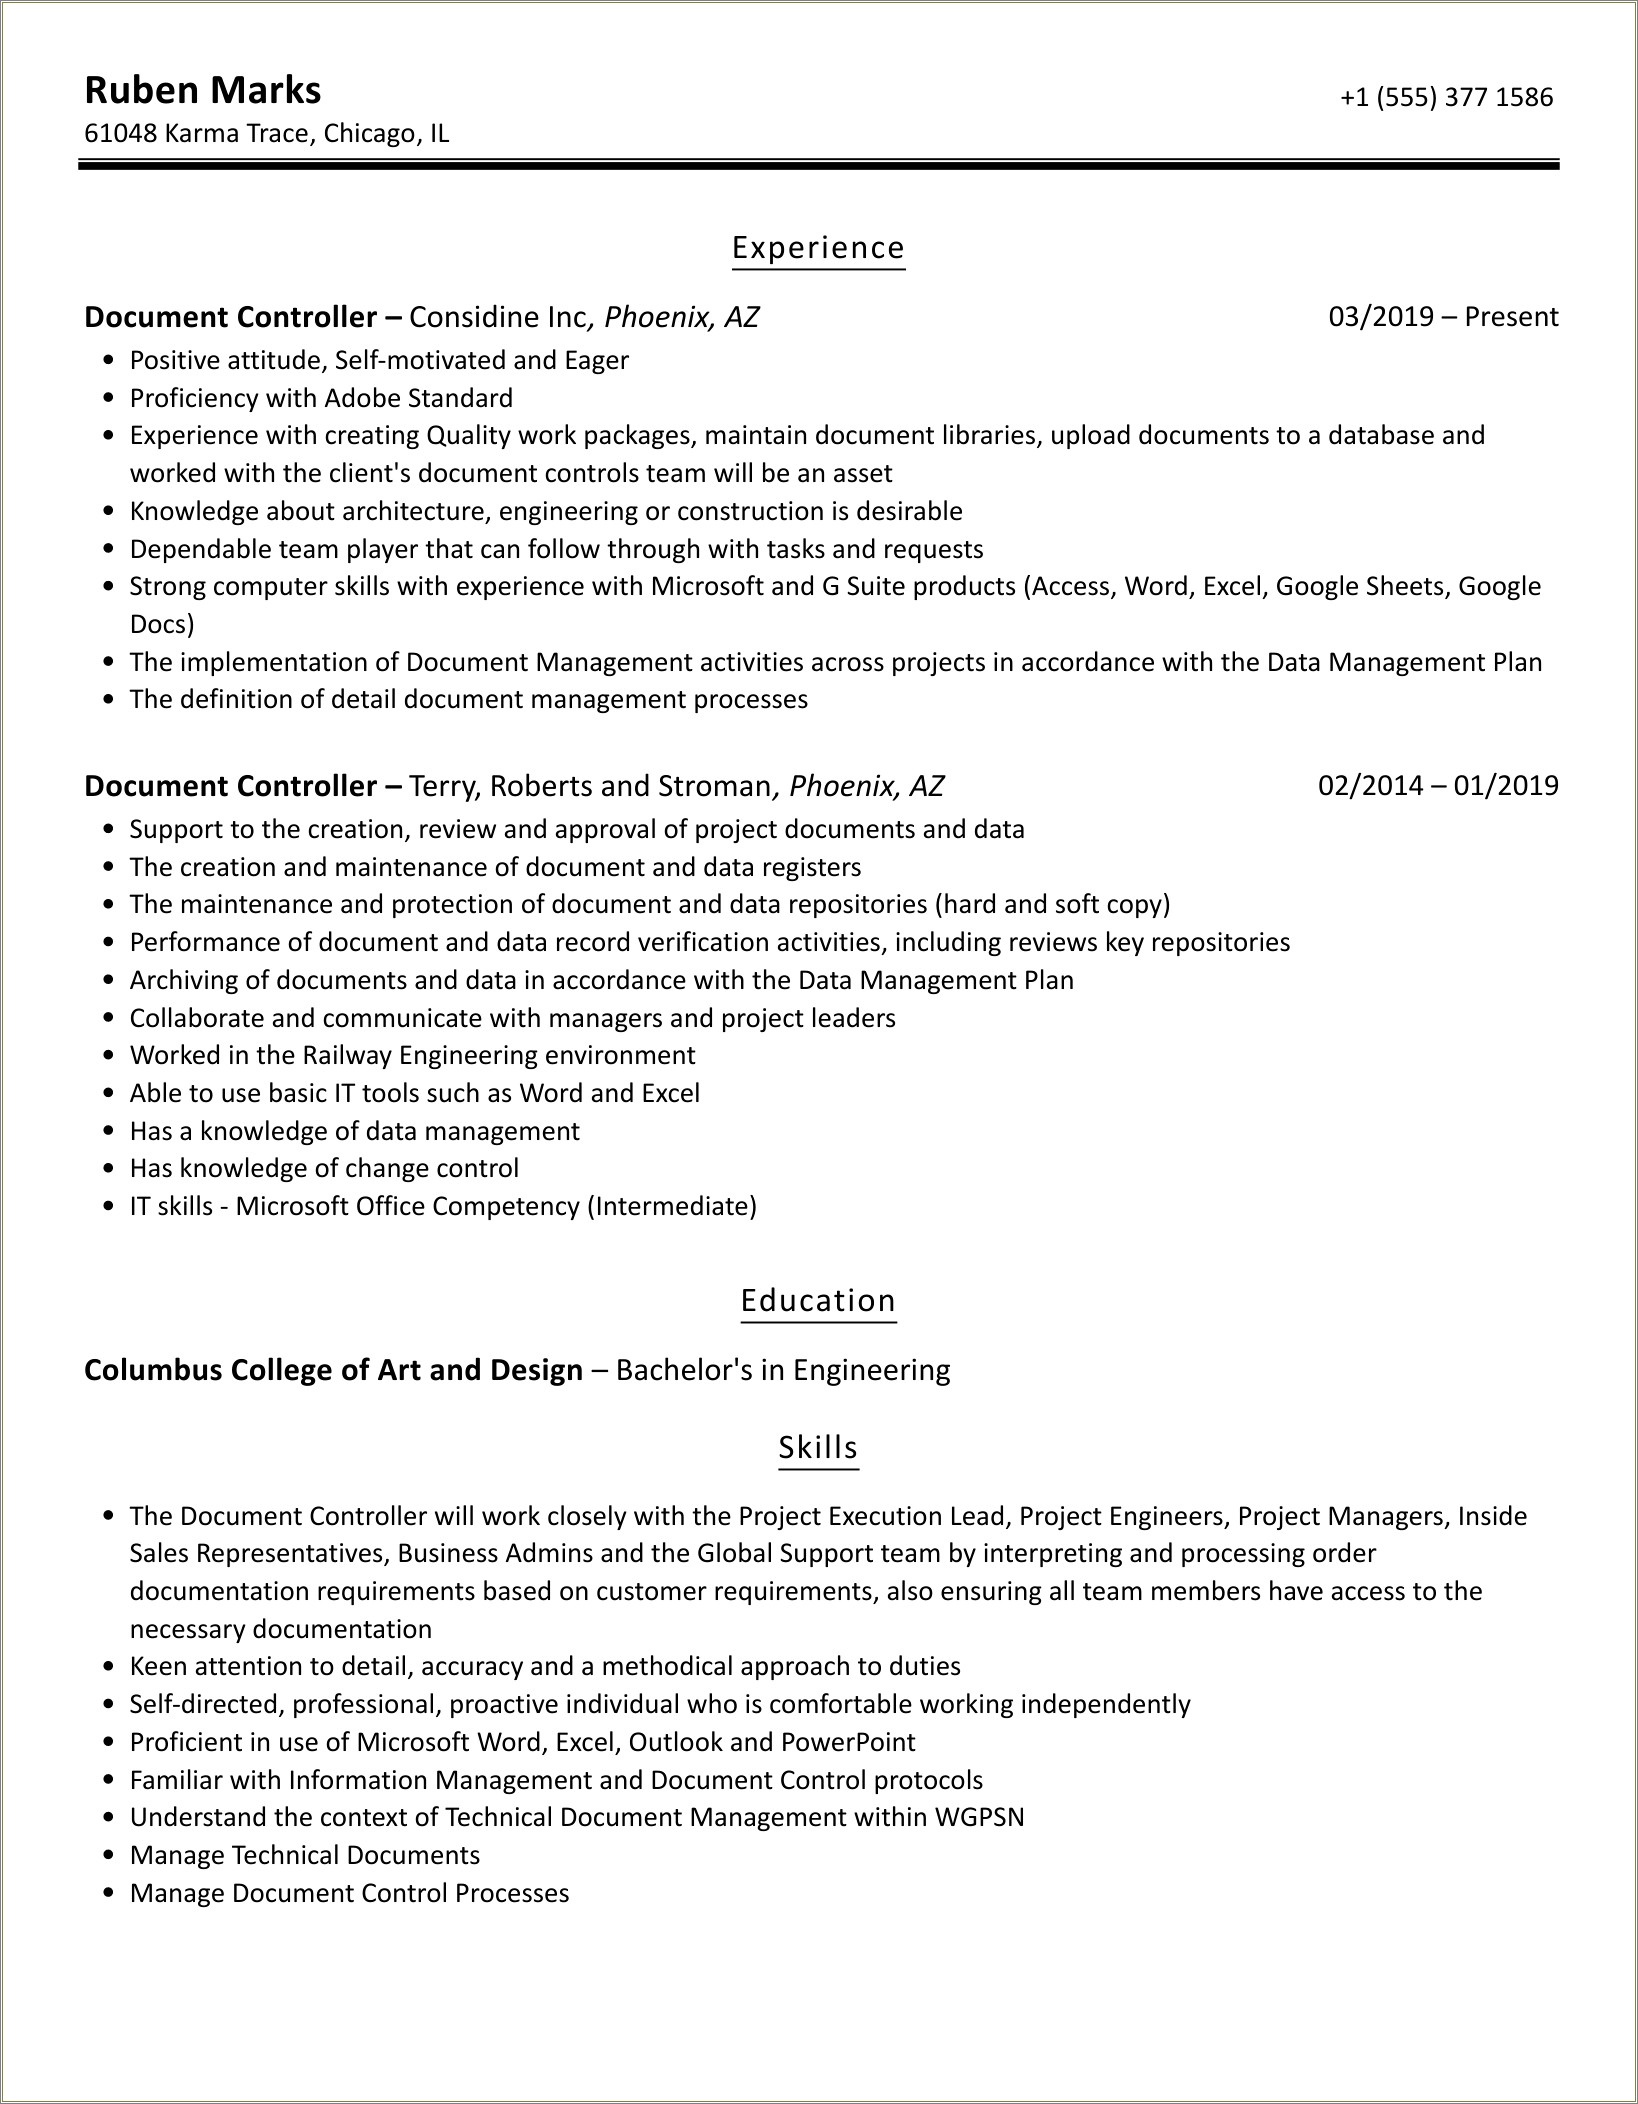 Career Objective For Resume For Document Controller